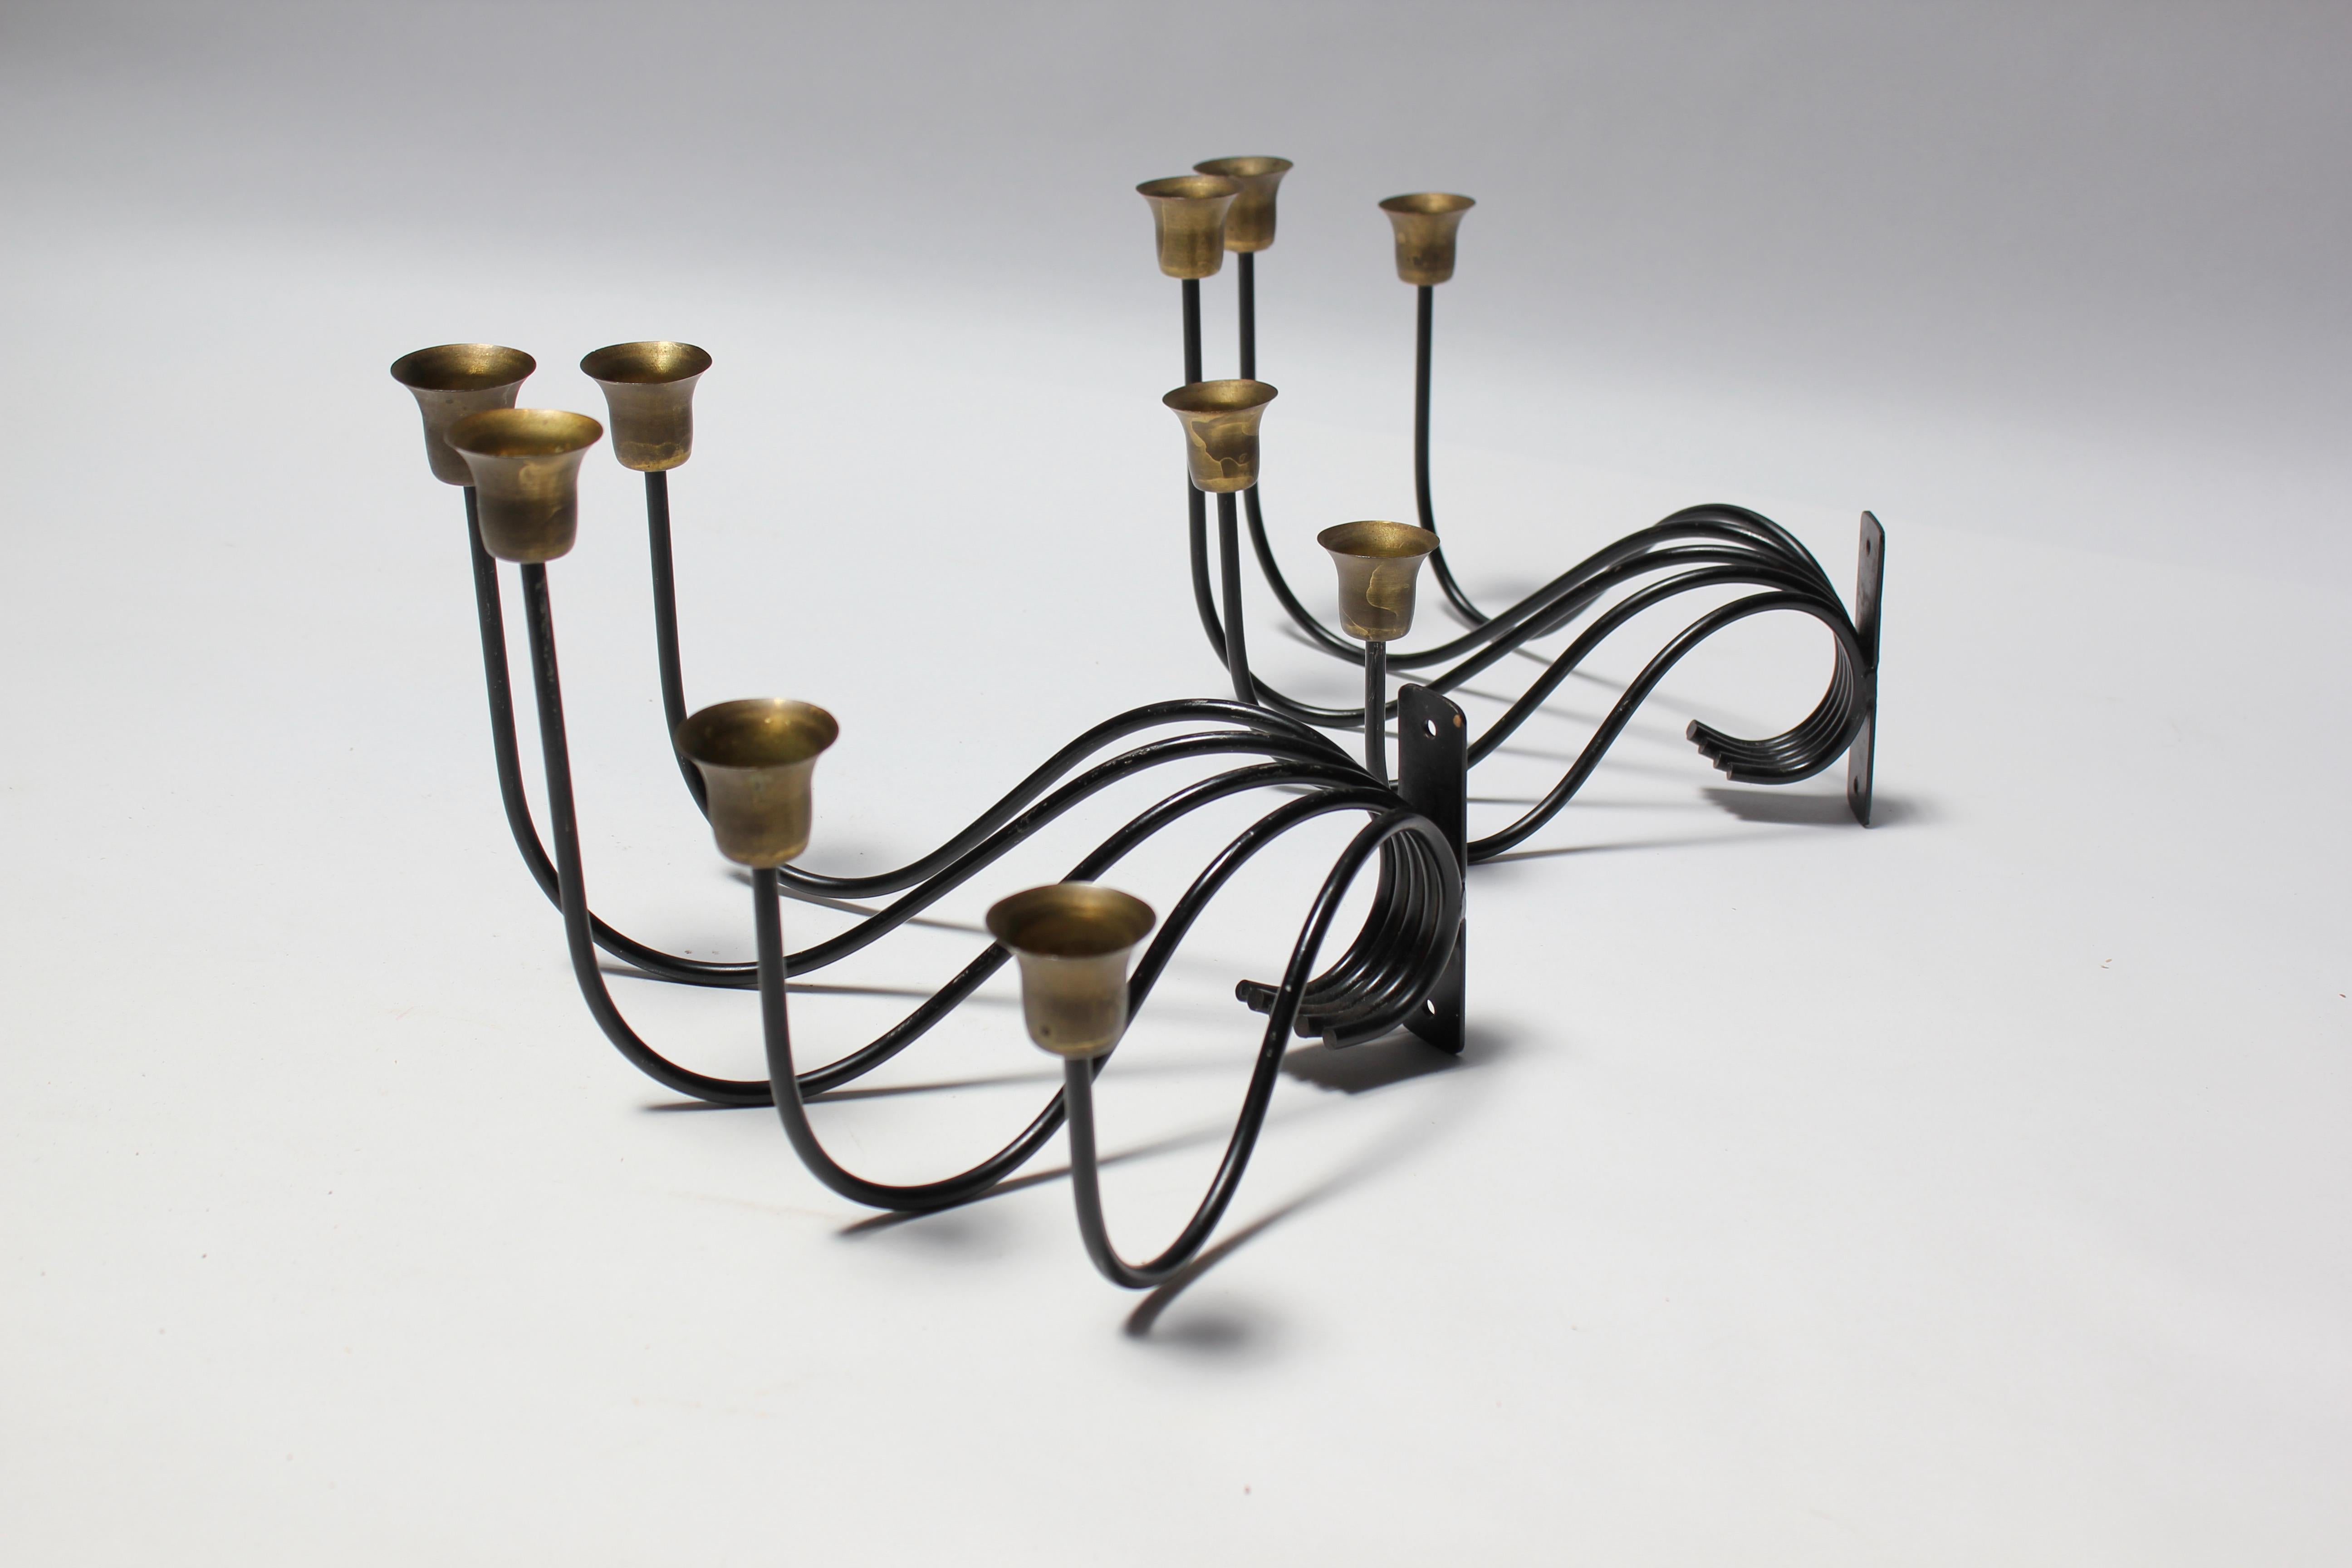 Vintage Danish candle sconces with patinated brass cups and lacquered metal stems / mounts designed by Svend Aage Holm Sørensen for his eponymous Holm Sørensen Co. (Danmark, ca. 1950). Each sconce / candelabra contains five candle holders (ten